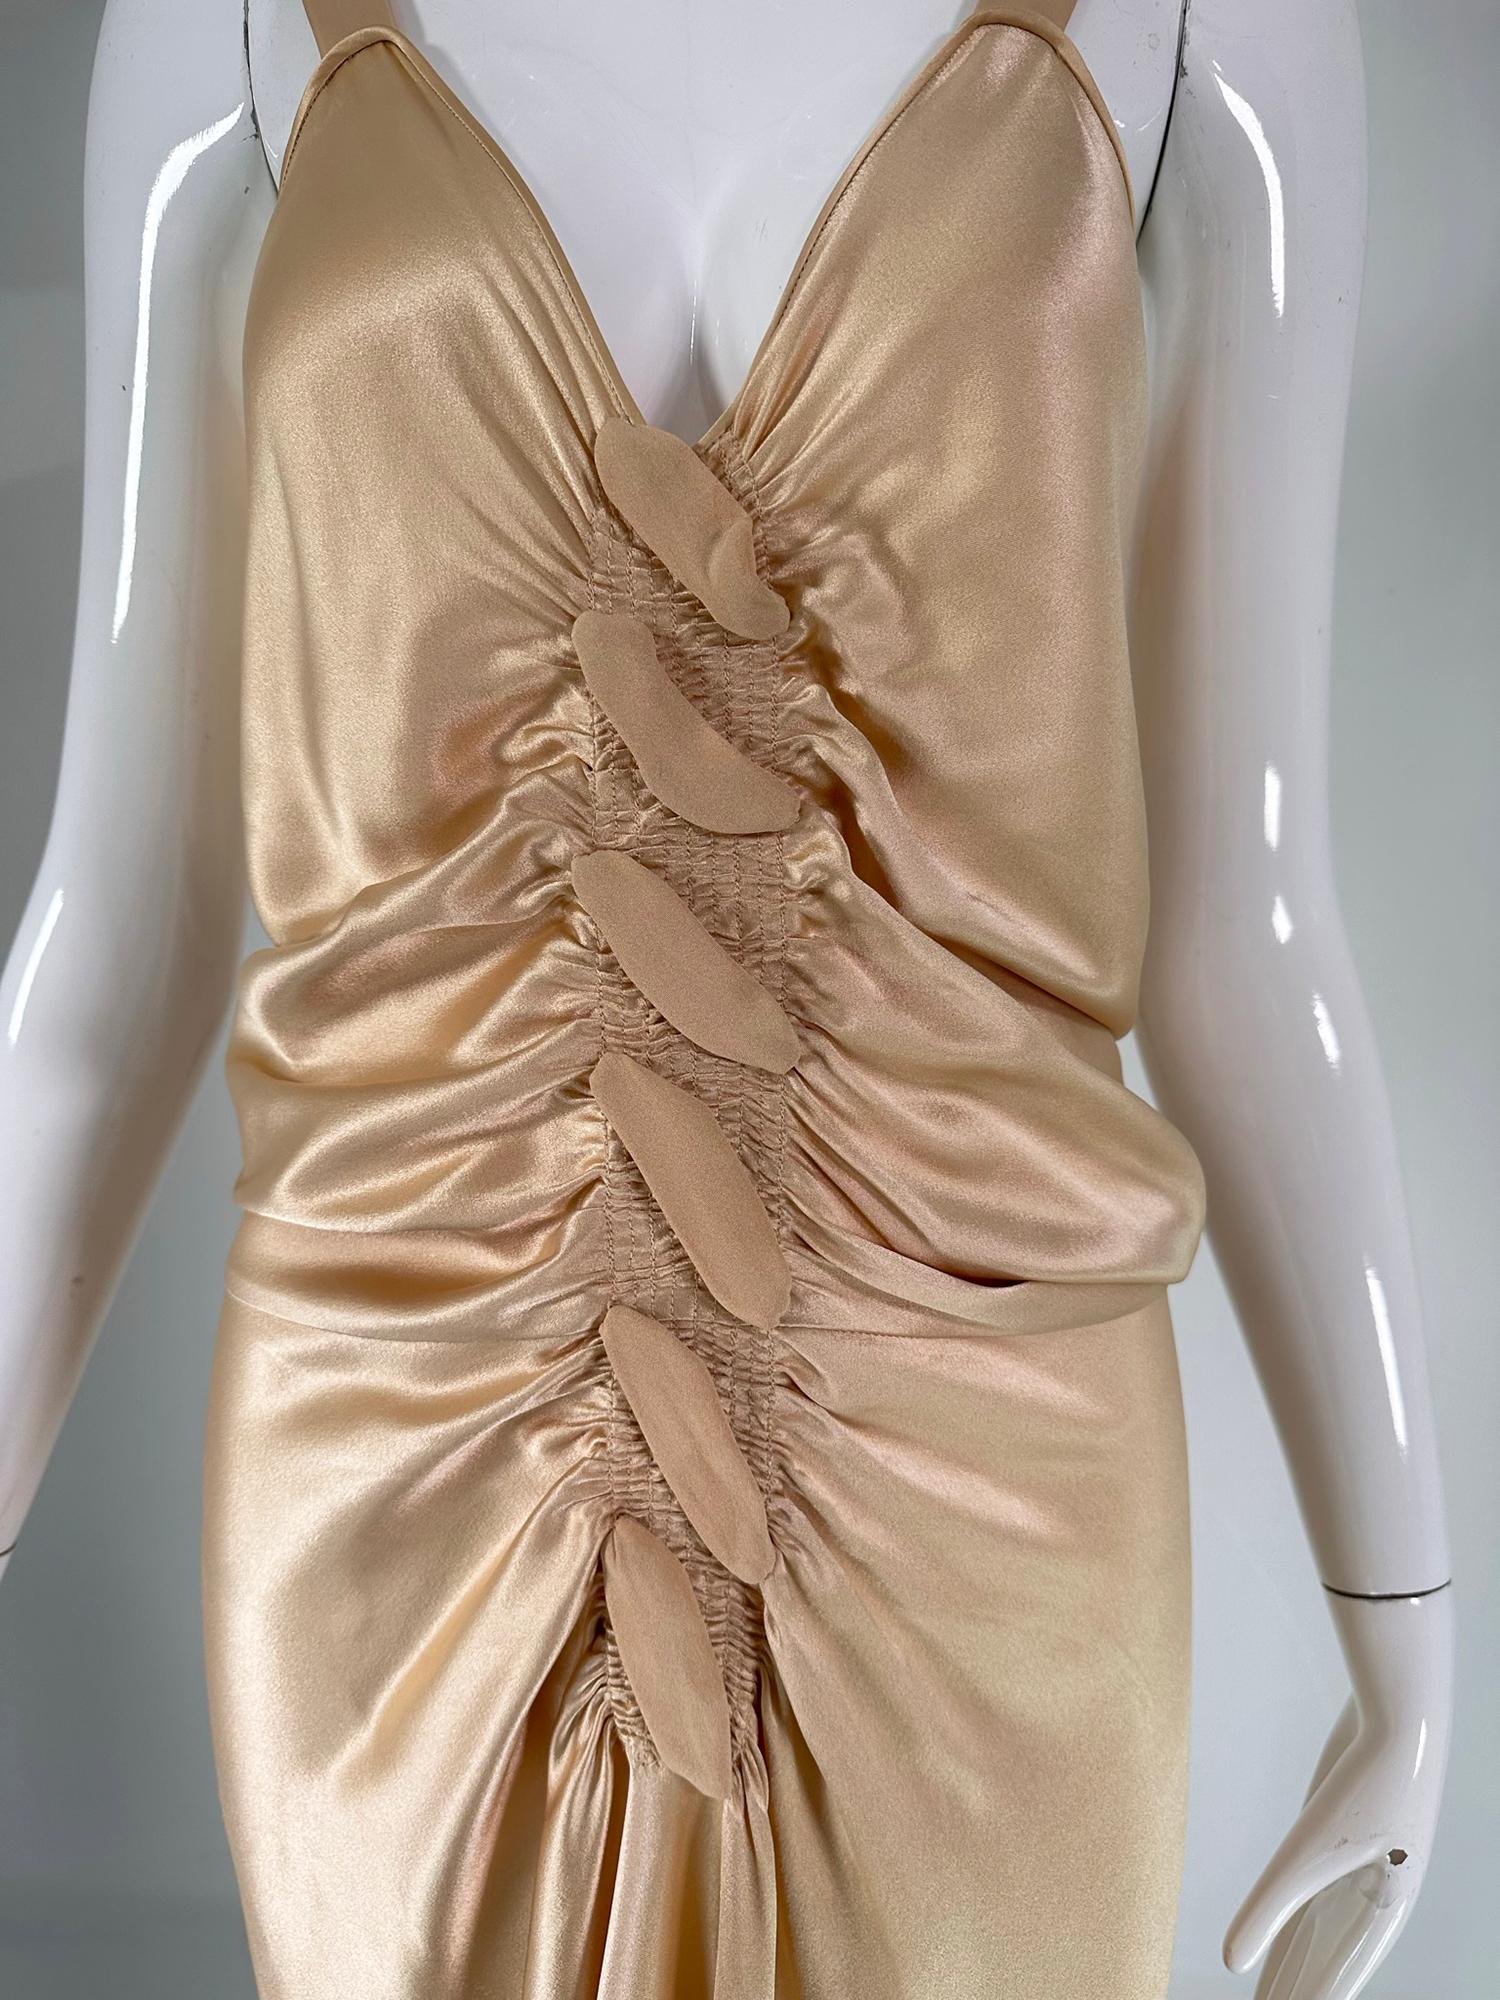 John Galliano, old Hollywood glamourous gold satin evening dress with a plunge V neckline and chiffon woven shirred center front, The back features a row of working self buttons & loops. Amazing dress of silky satin the design has a touch of the